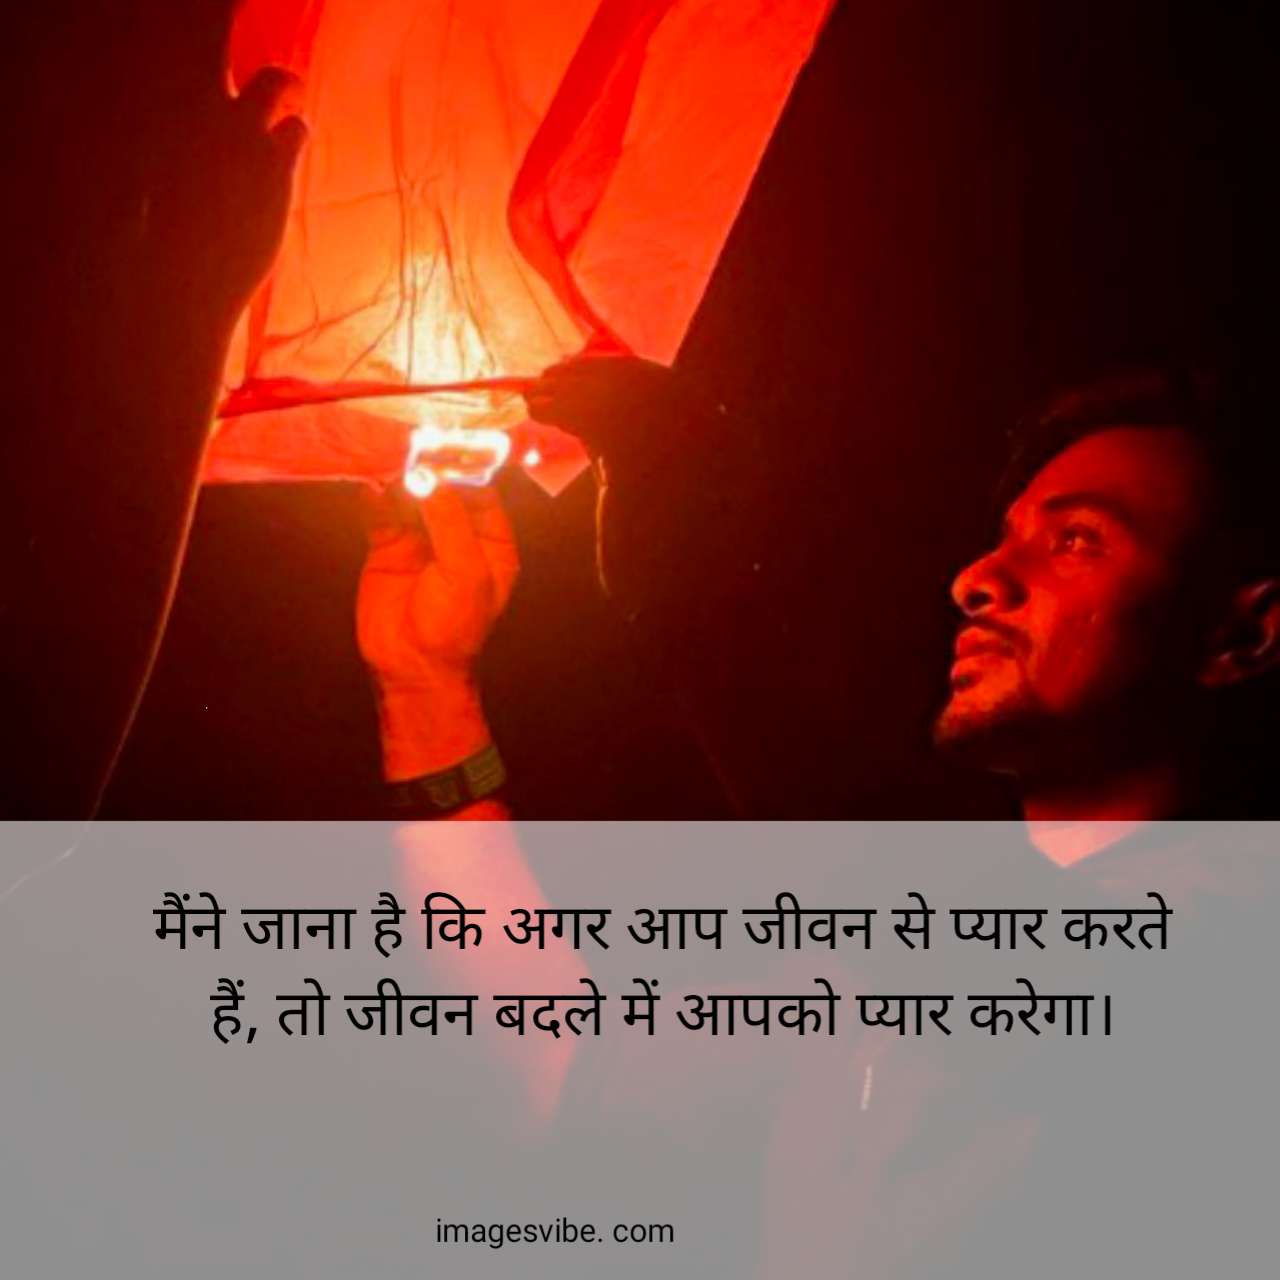 Images With Quotes About Life In Hindi24 